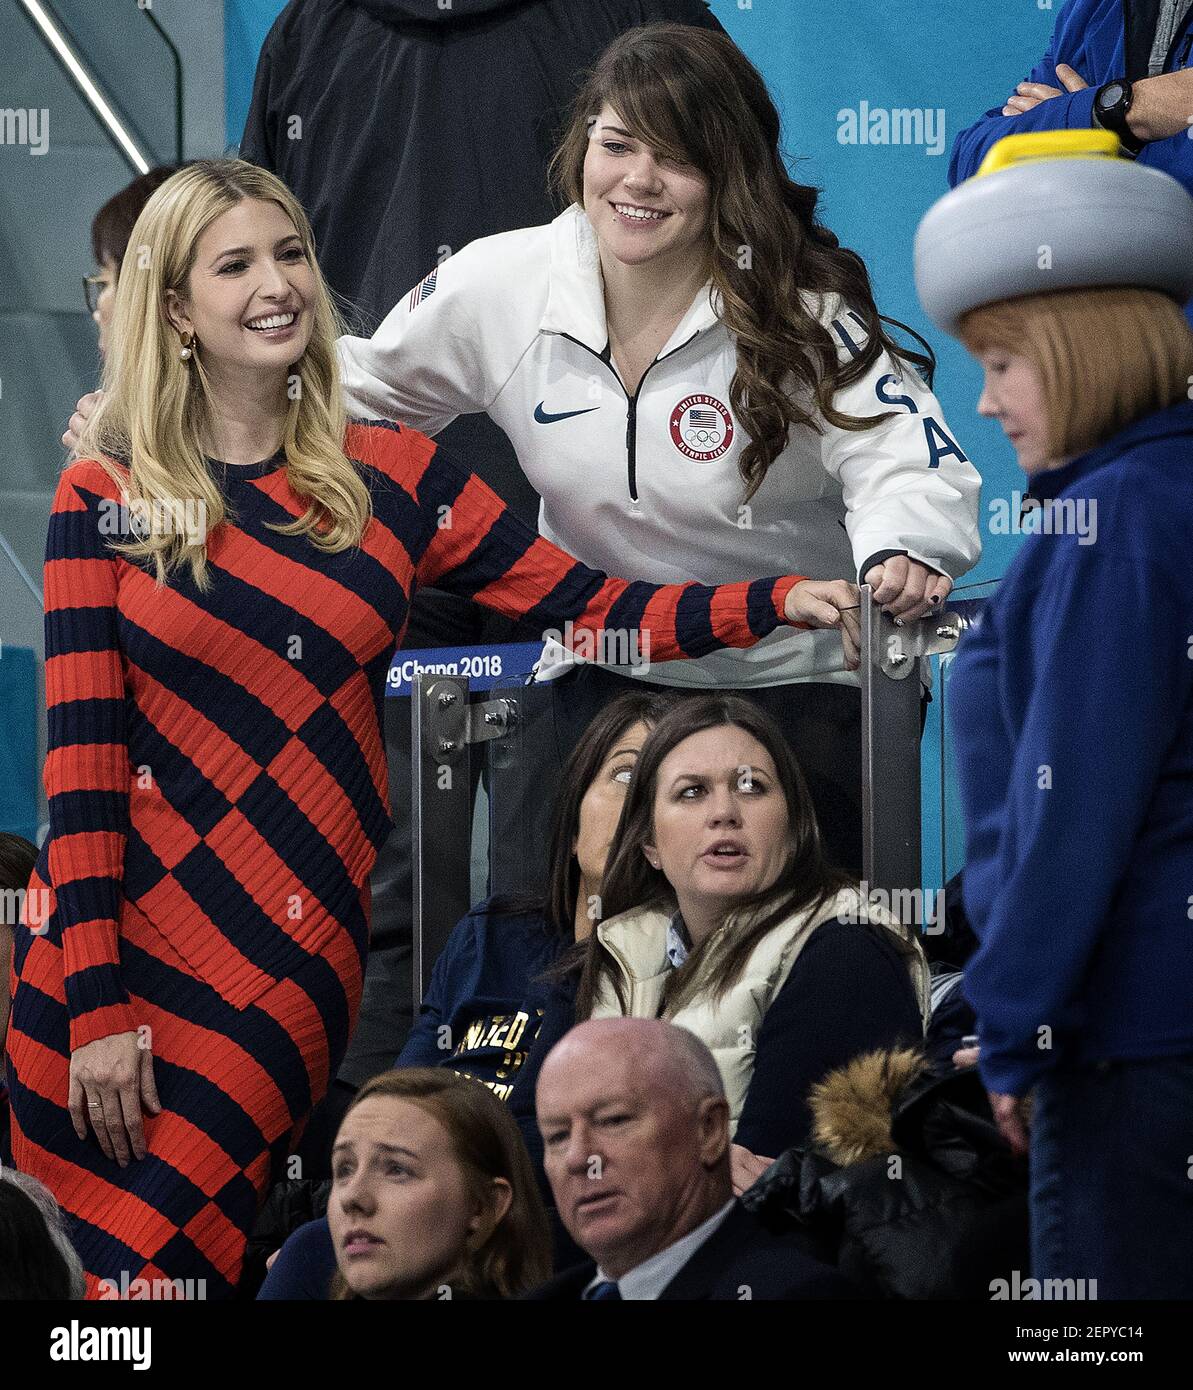 Ivanka Trump poses for a photo with USA curler Becca Hamilton at the Gangneung Curling Centre on Saturday, Feb. 24, 2018, at the Pyeongchang Winter Olympics. (Photo by Carlos Gonzalez/Minneapolis Star Tribune/TNS/Sipa USA) Stock Photo